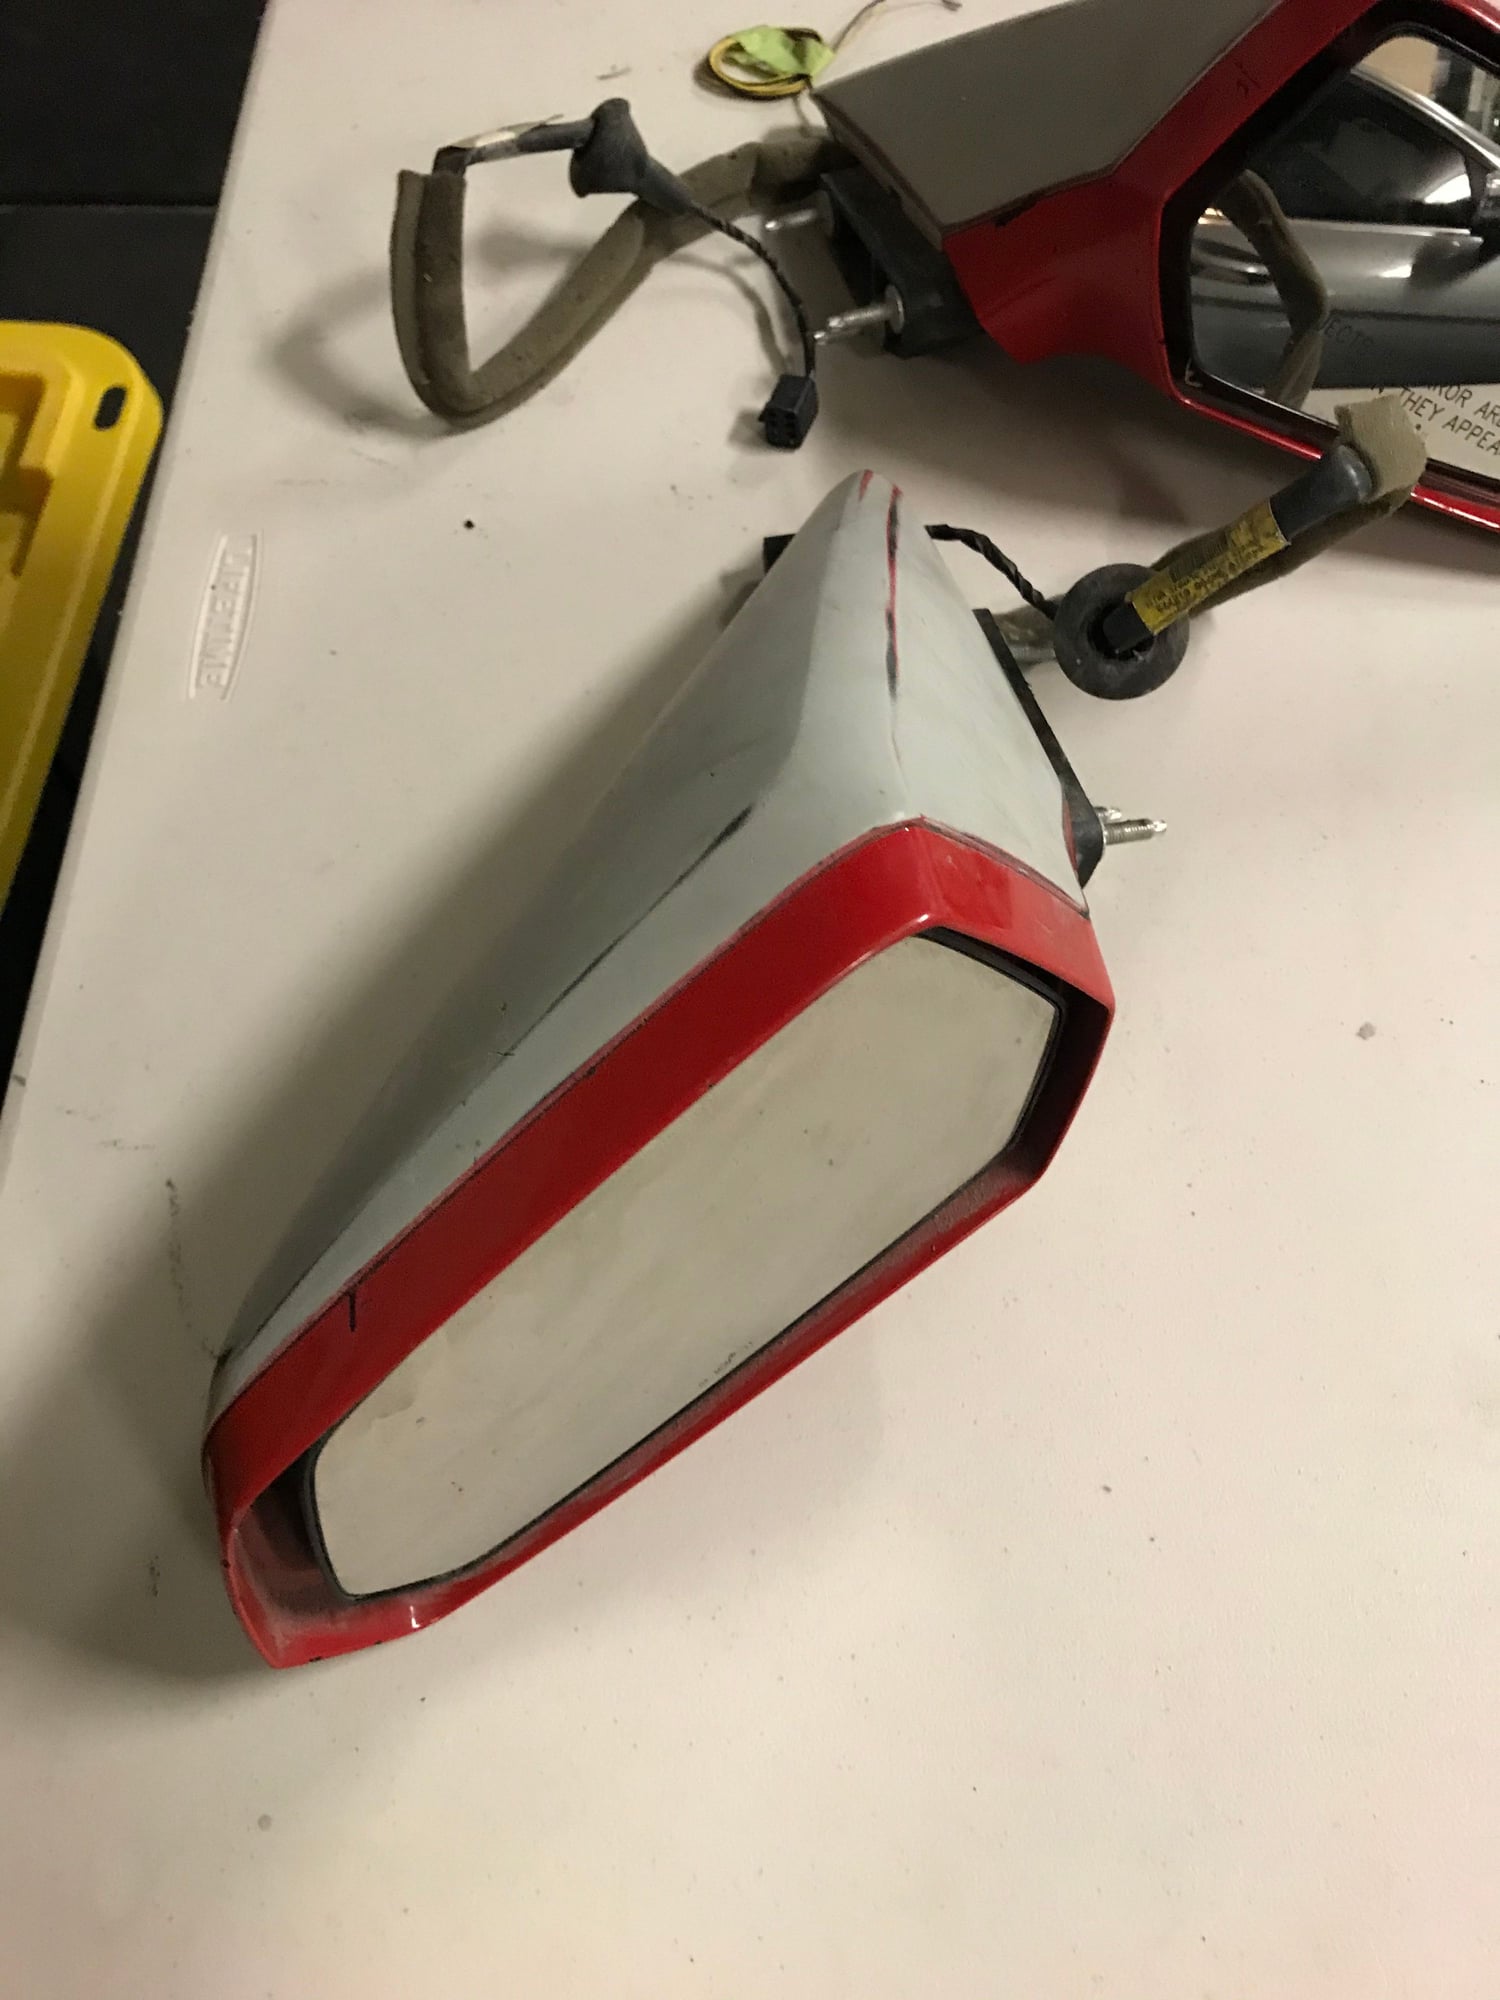  - 5th Gen Camaro custom door mirrors with integrated LED blinkers - San Diego, CA 92067, United States